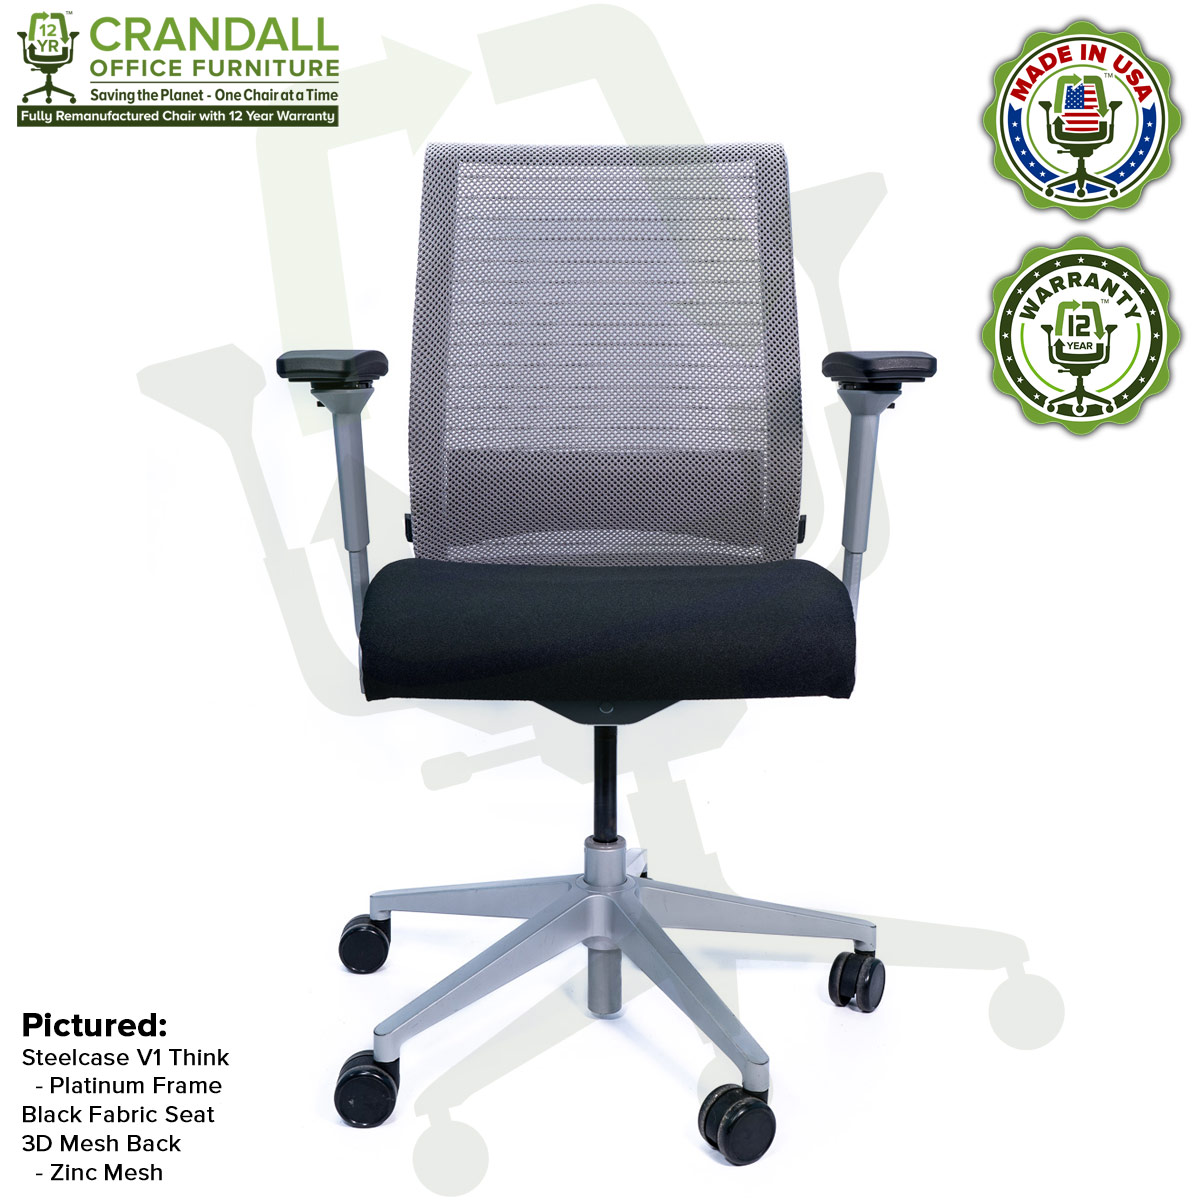 Crandall Office Furniture Remanufactured Steelcase Think Chair with 12 Year Warranty - Platinum Frame - 01